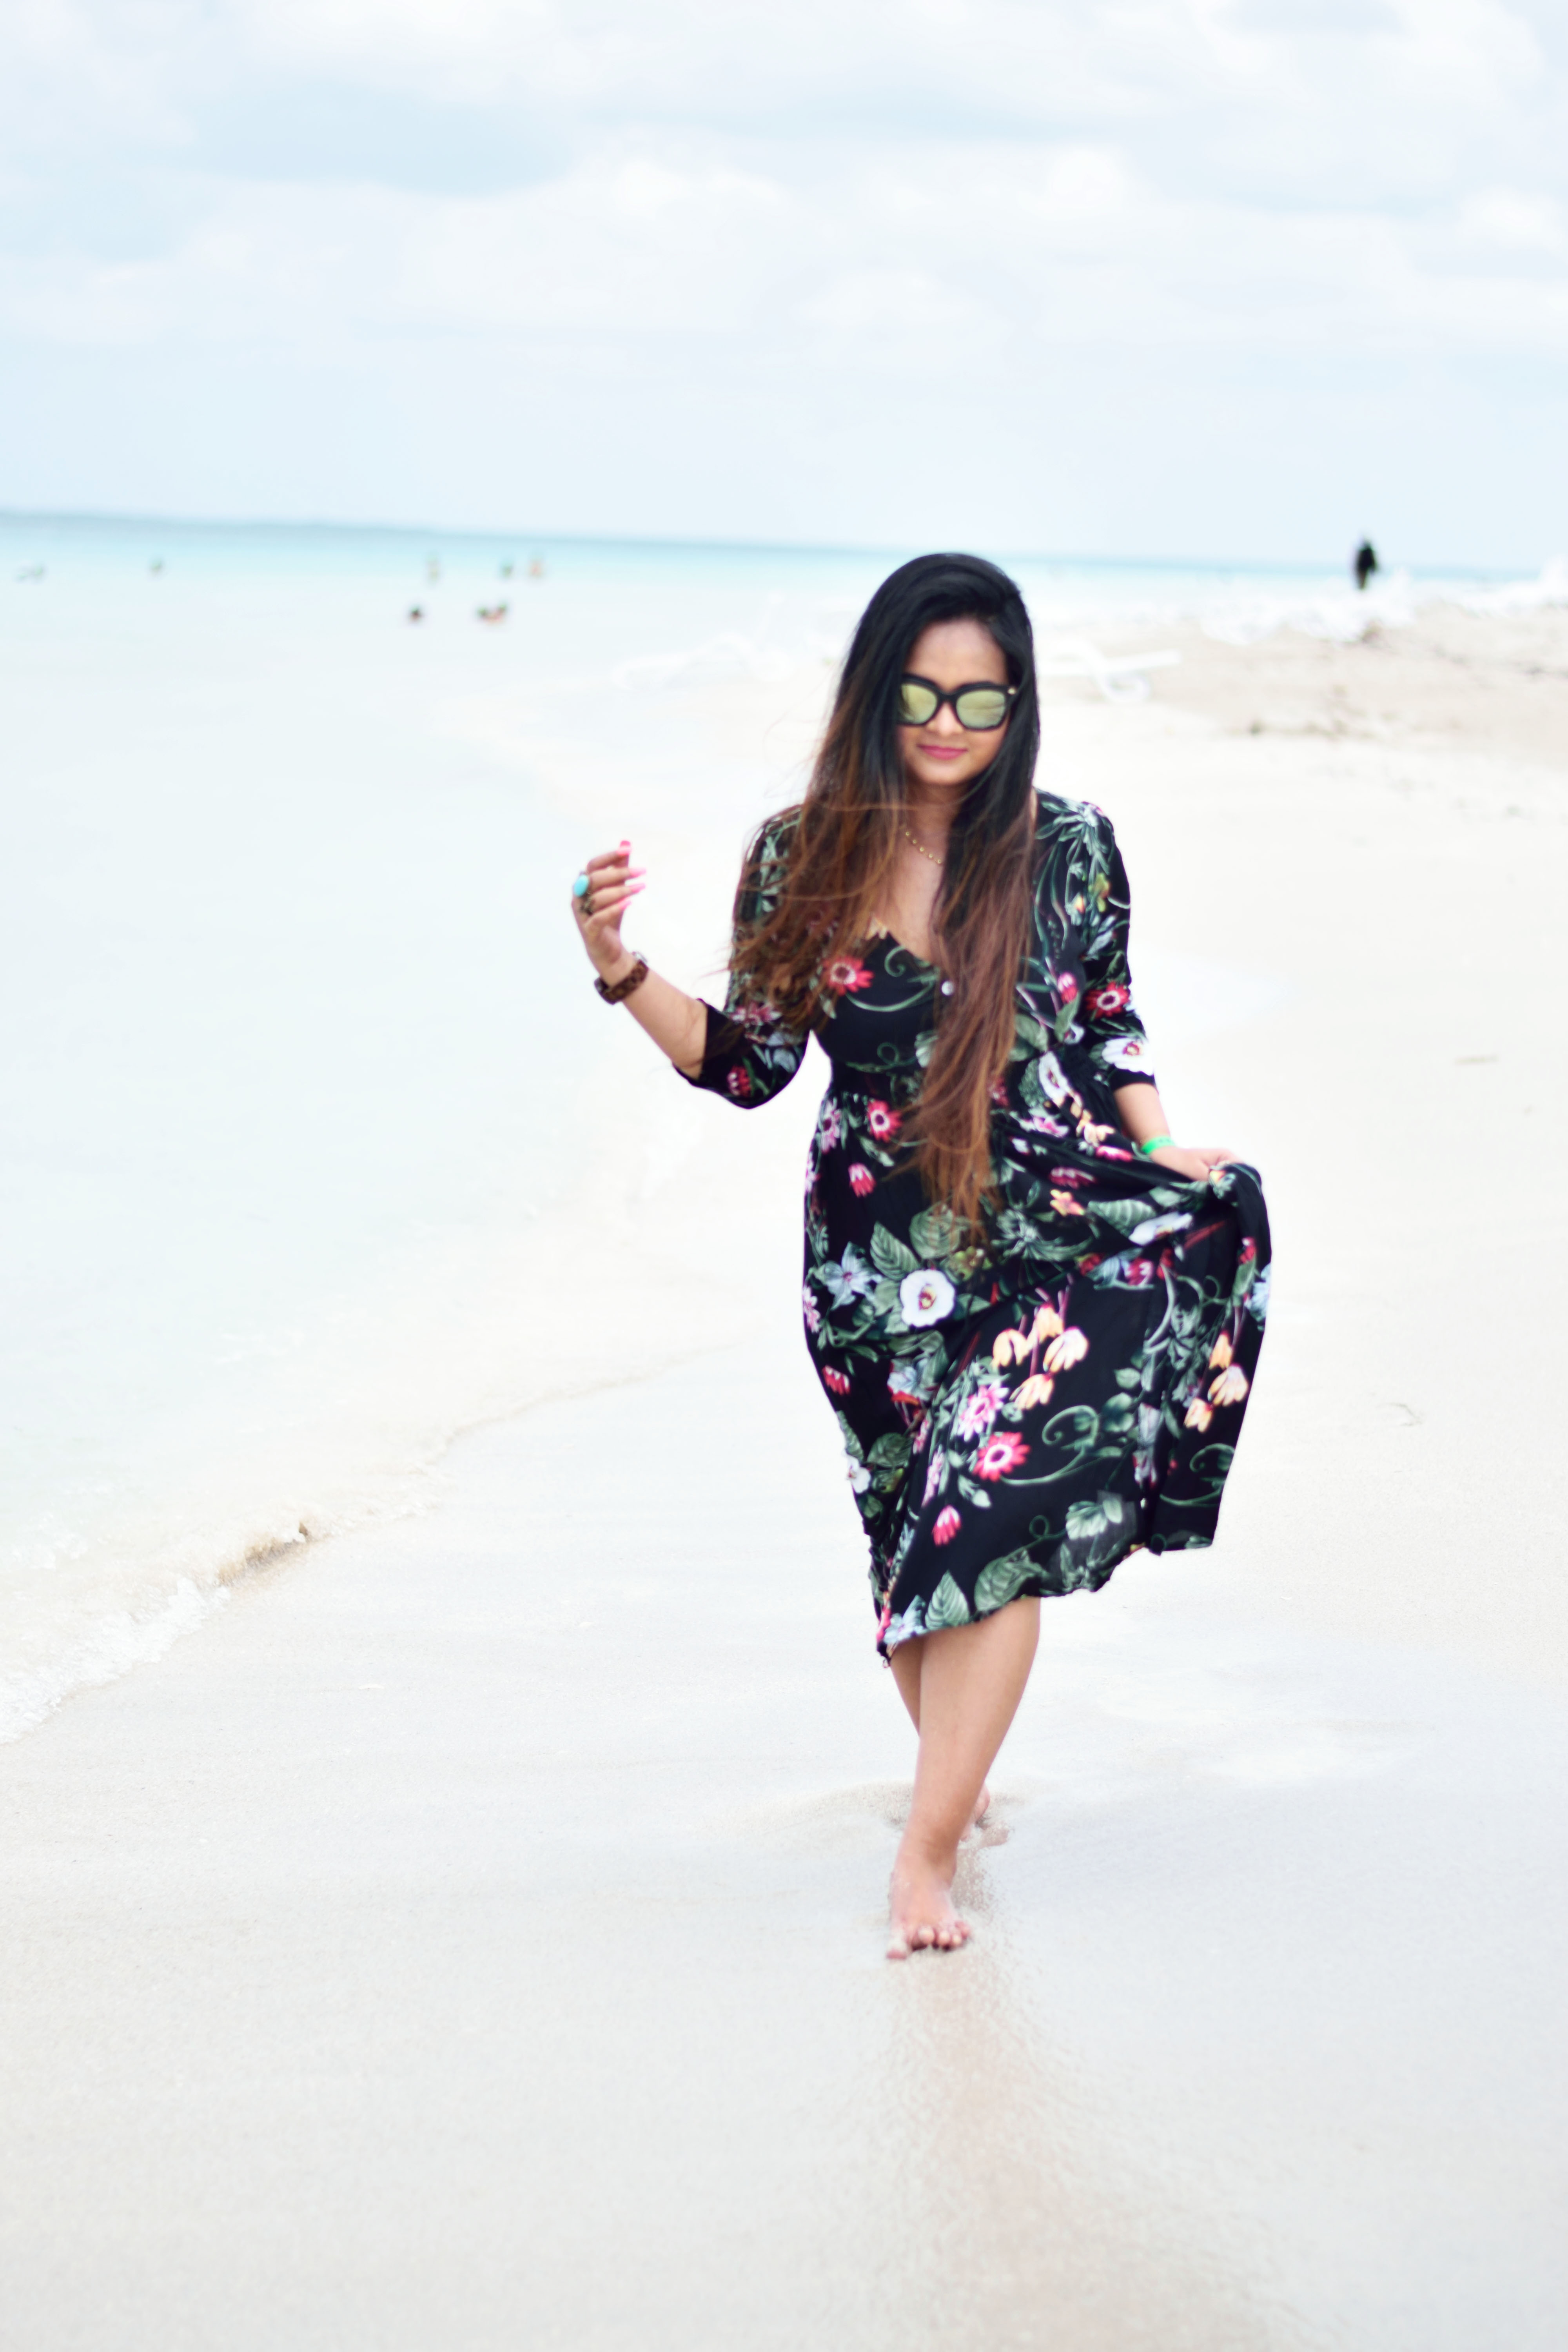 Black Floral Boho Dress from JustFashionNow - The Perfect Boho Look